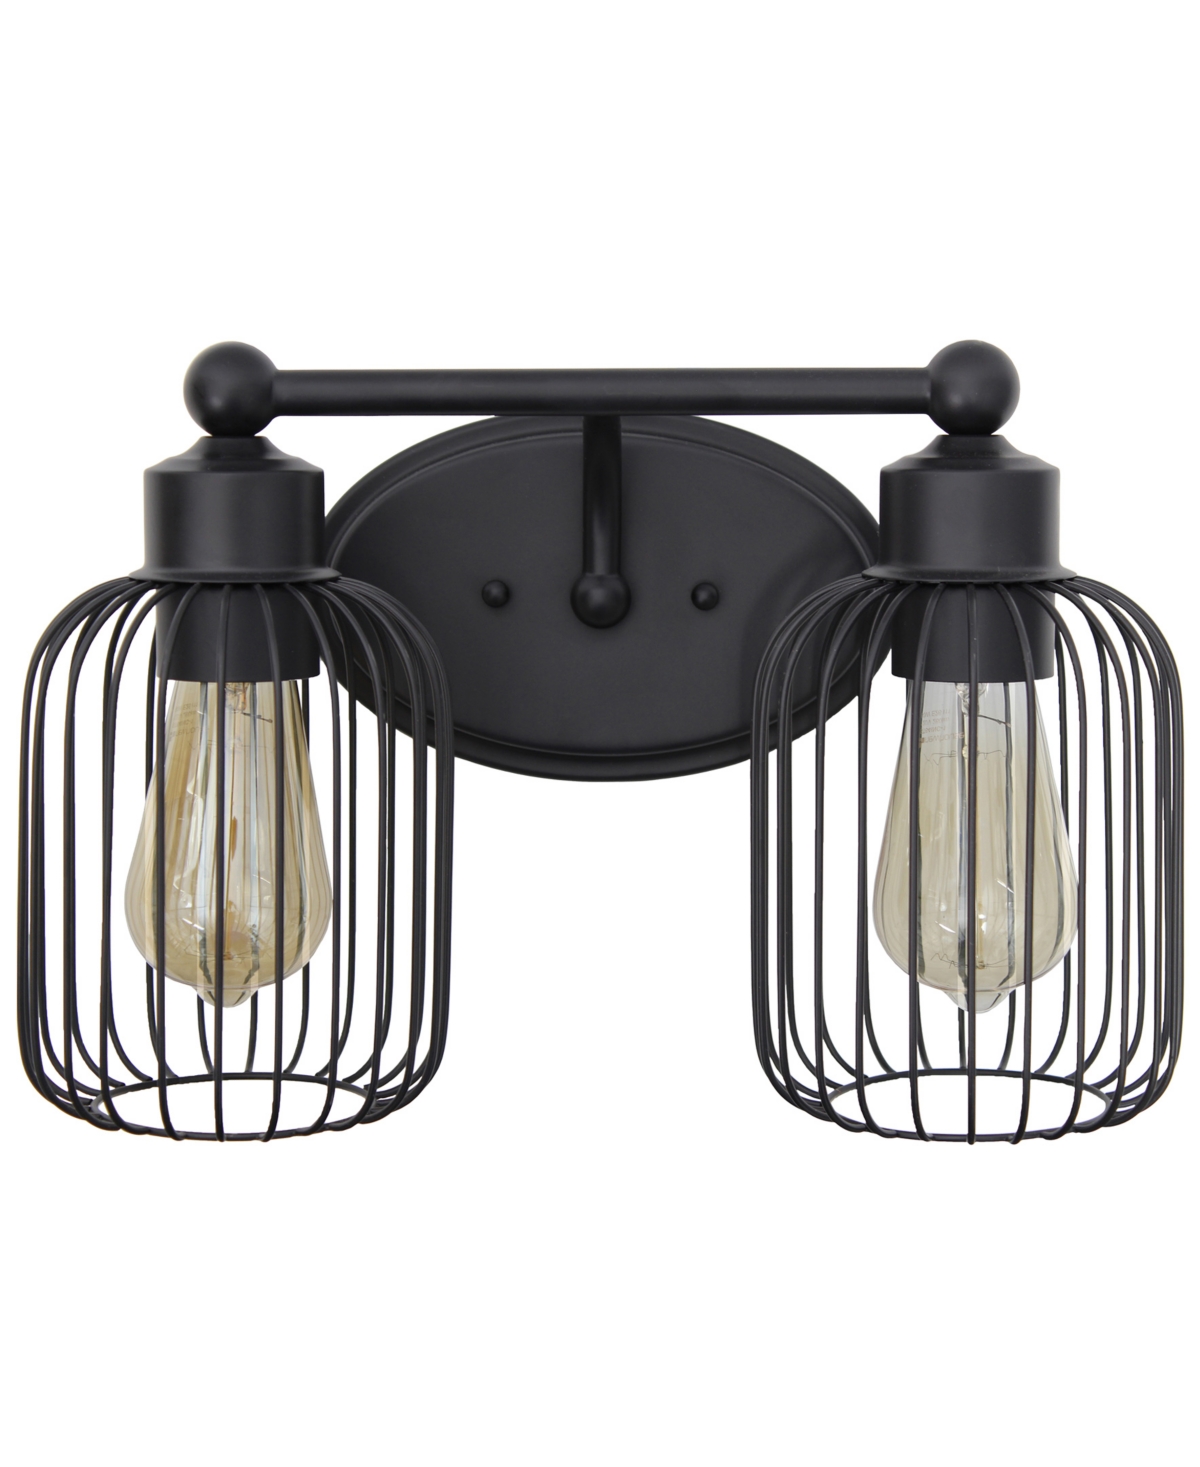 Shop Lalia Home Ironhouse Two Light Industrial Decorative Cage Vanity Uplight Downlight Wall Mounted Fixture In Black